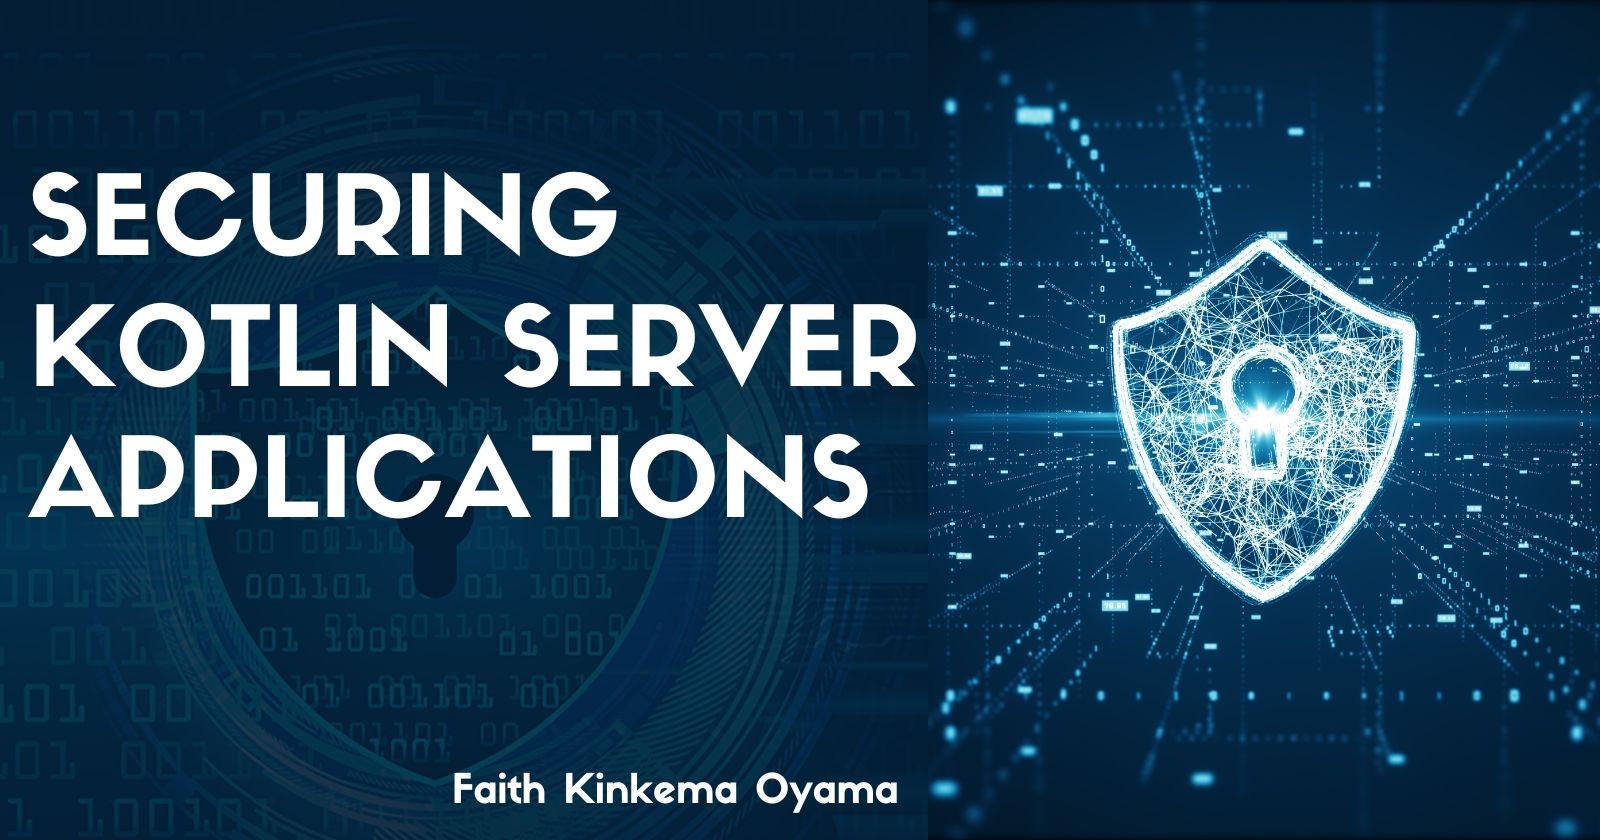 How to Secure Kotlin Server Applications